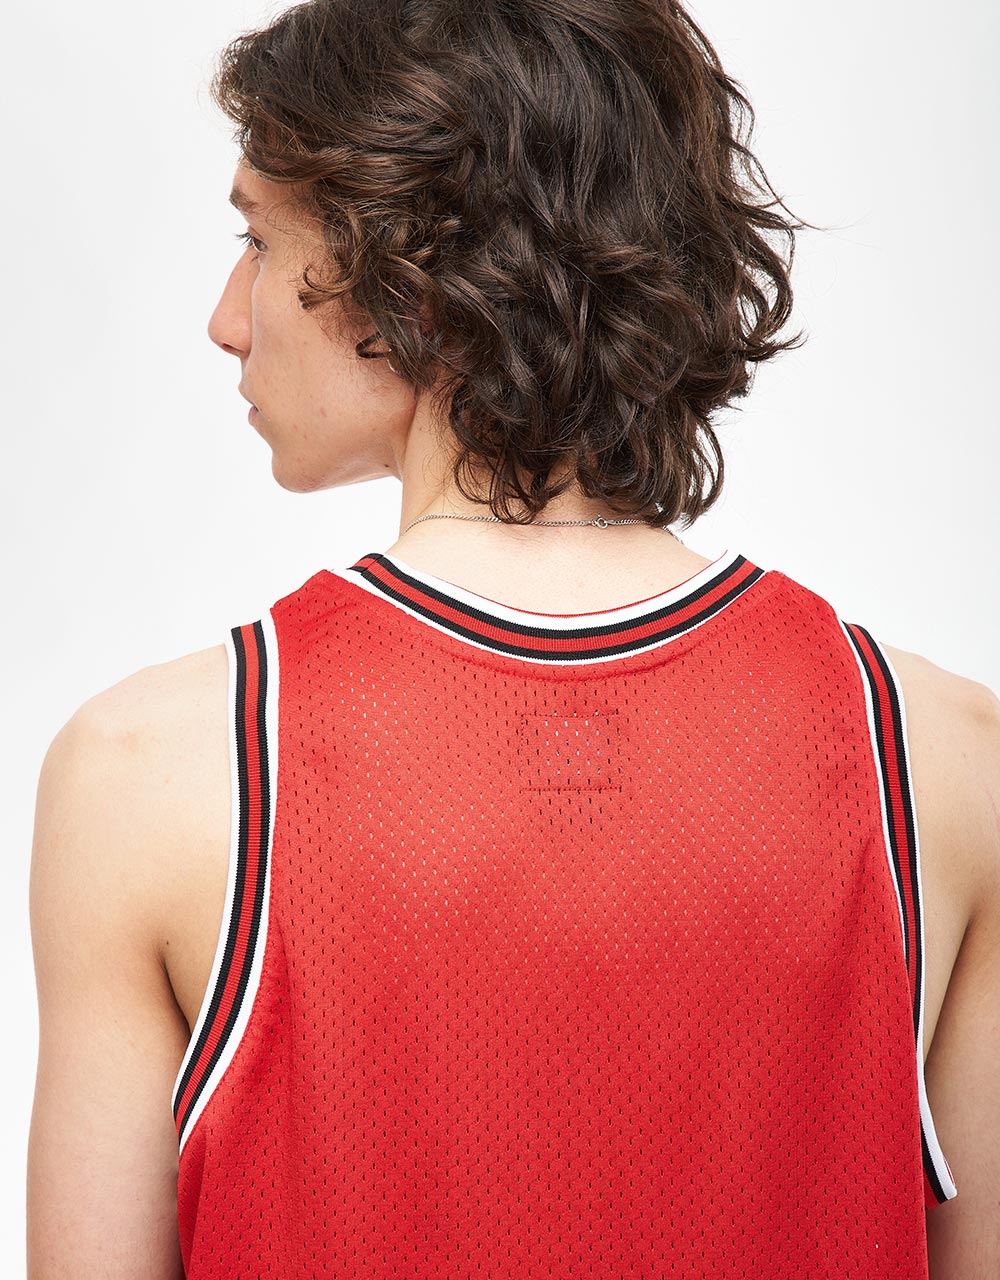 DC Shy Town Jersey - Racing Red